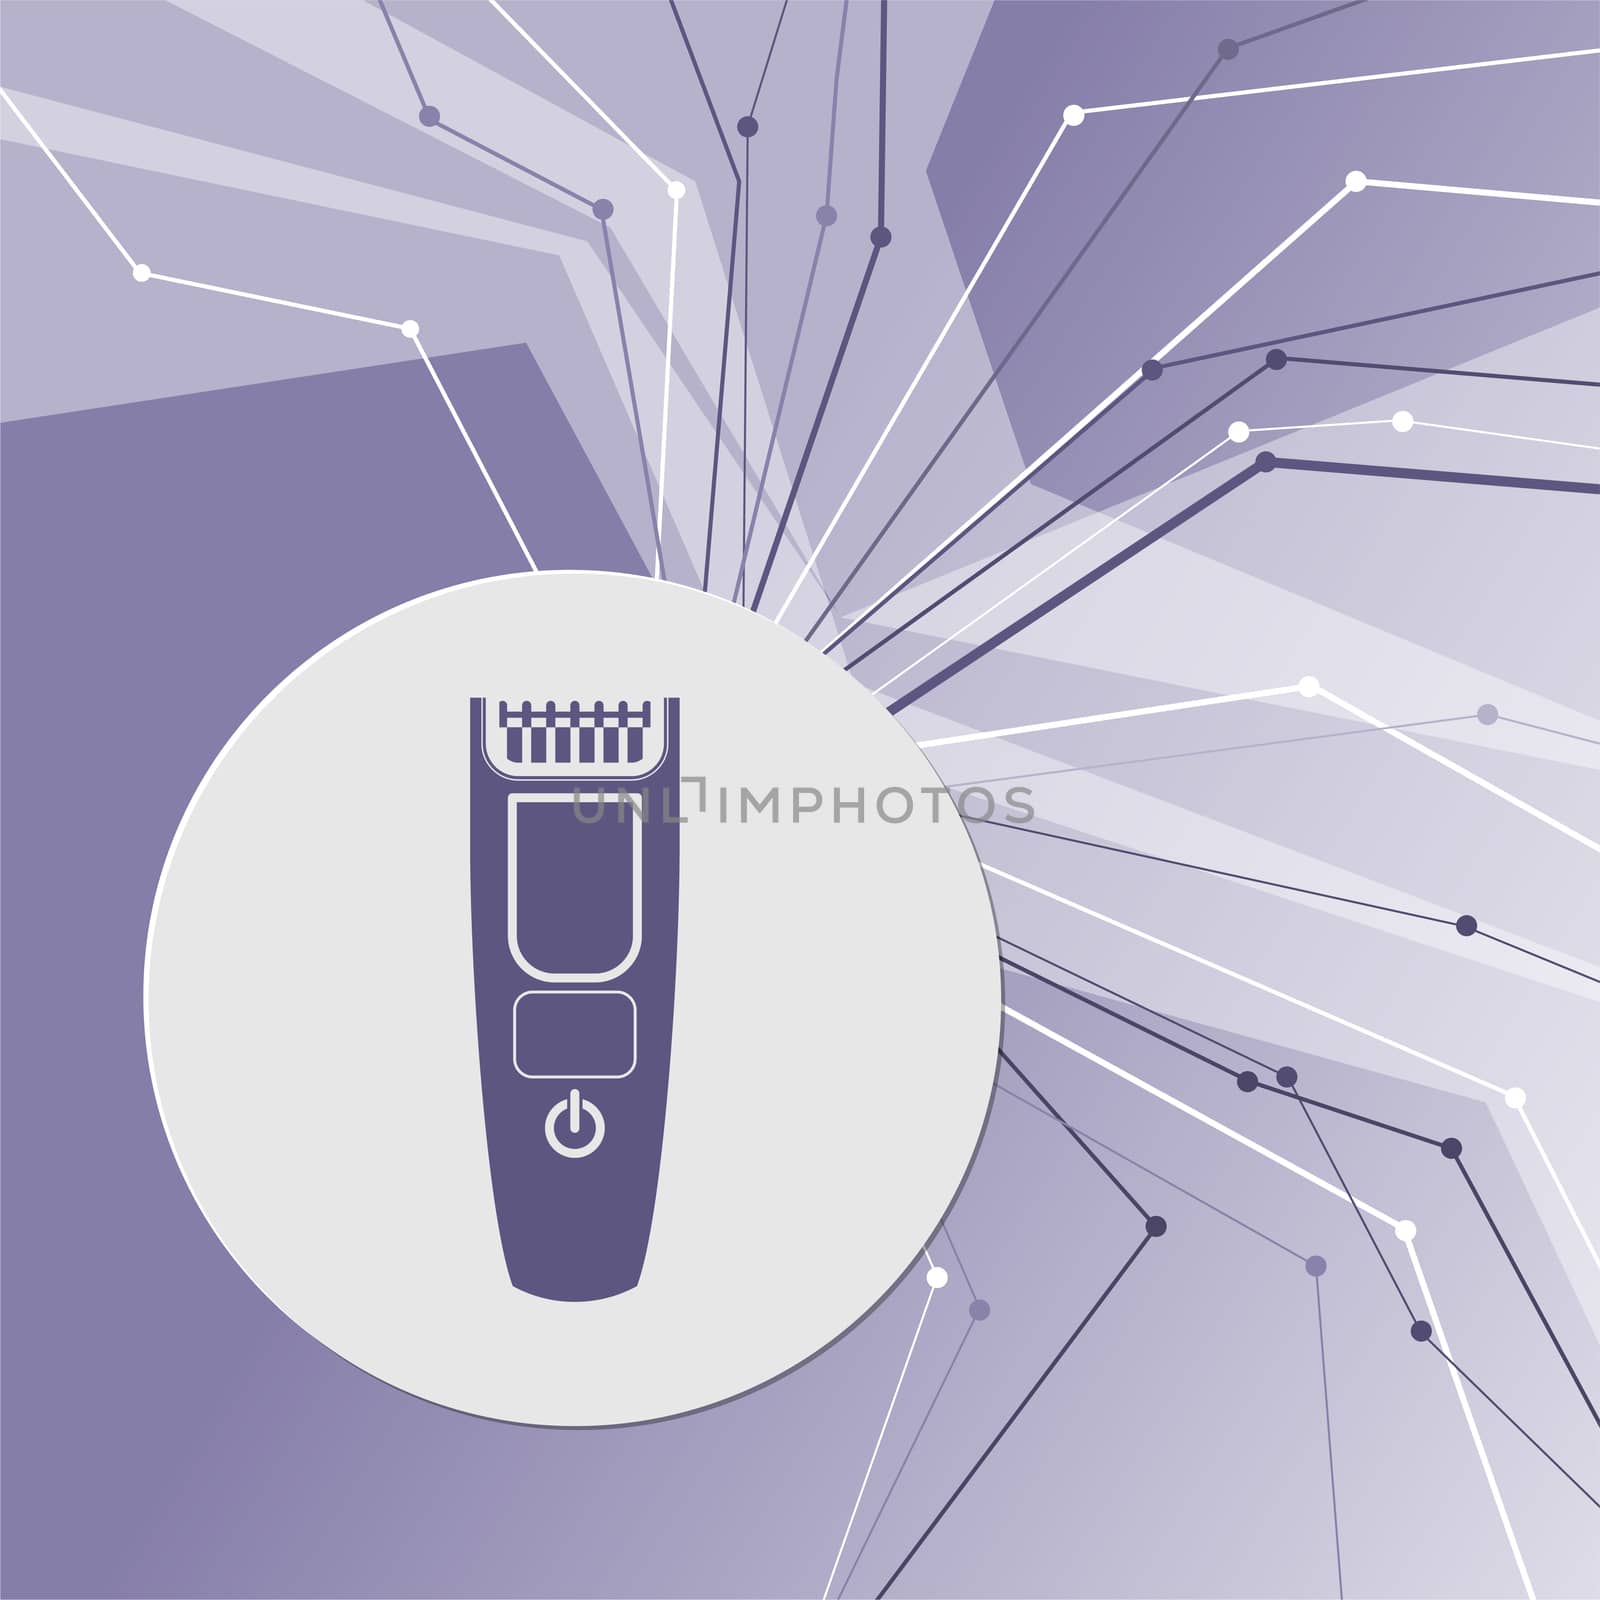 Shaver hairclipper icon on purple abstract modern background. The lines in all directions. With room for your advertising.  by Adamchuk